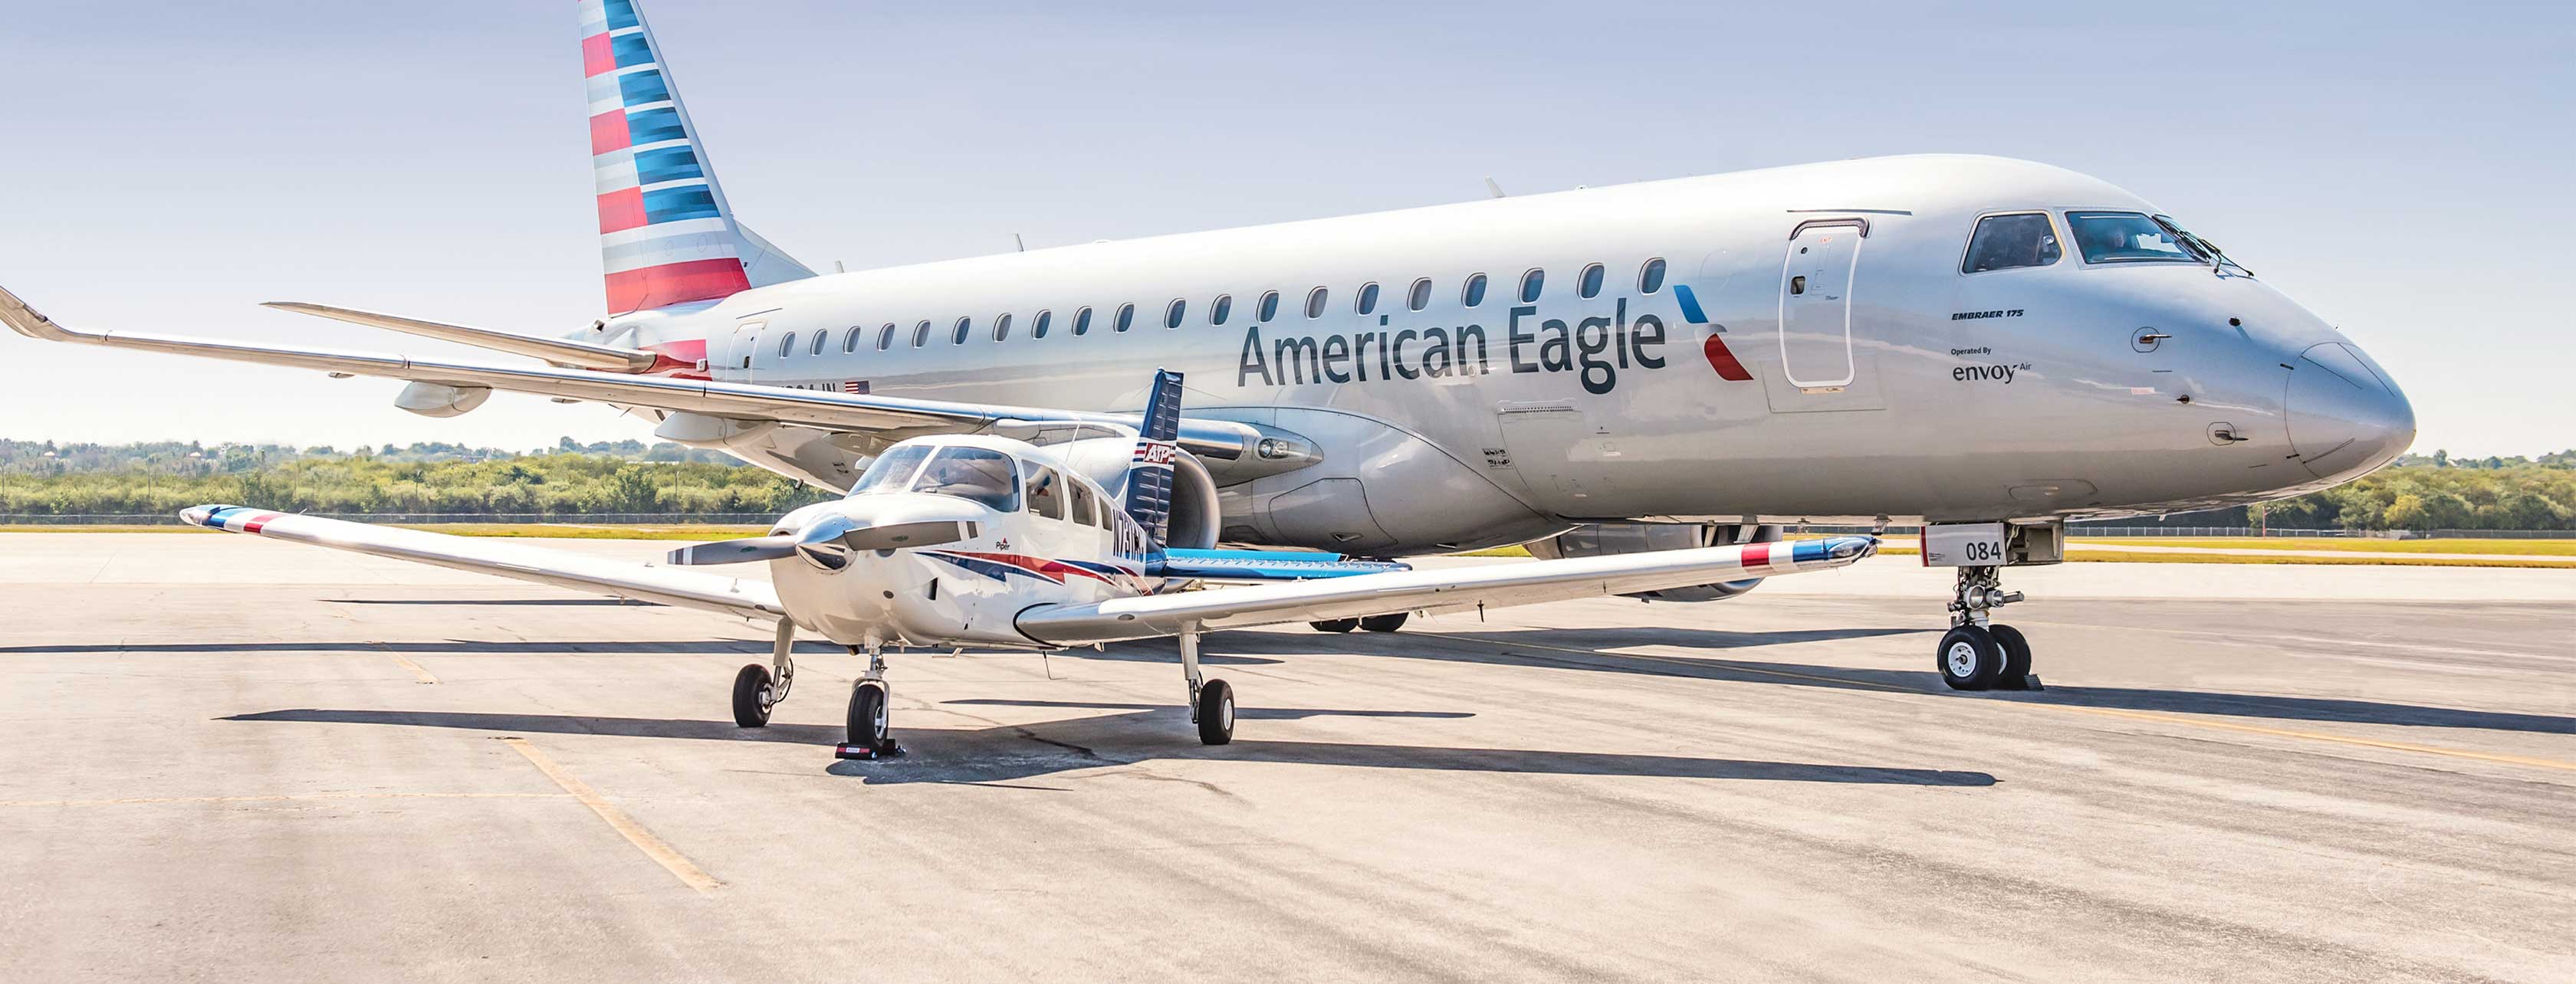 Become a Commercial Pilot - Fly an American Eagle ERJ